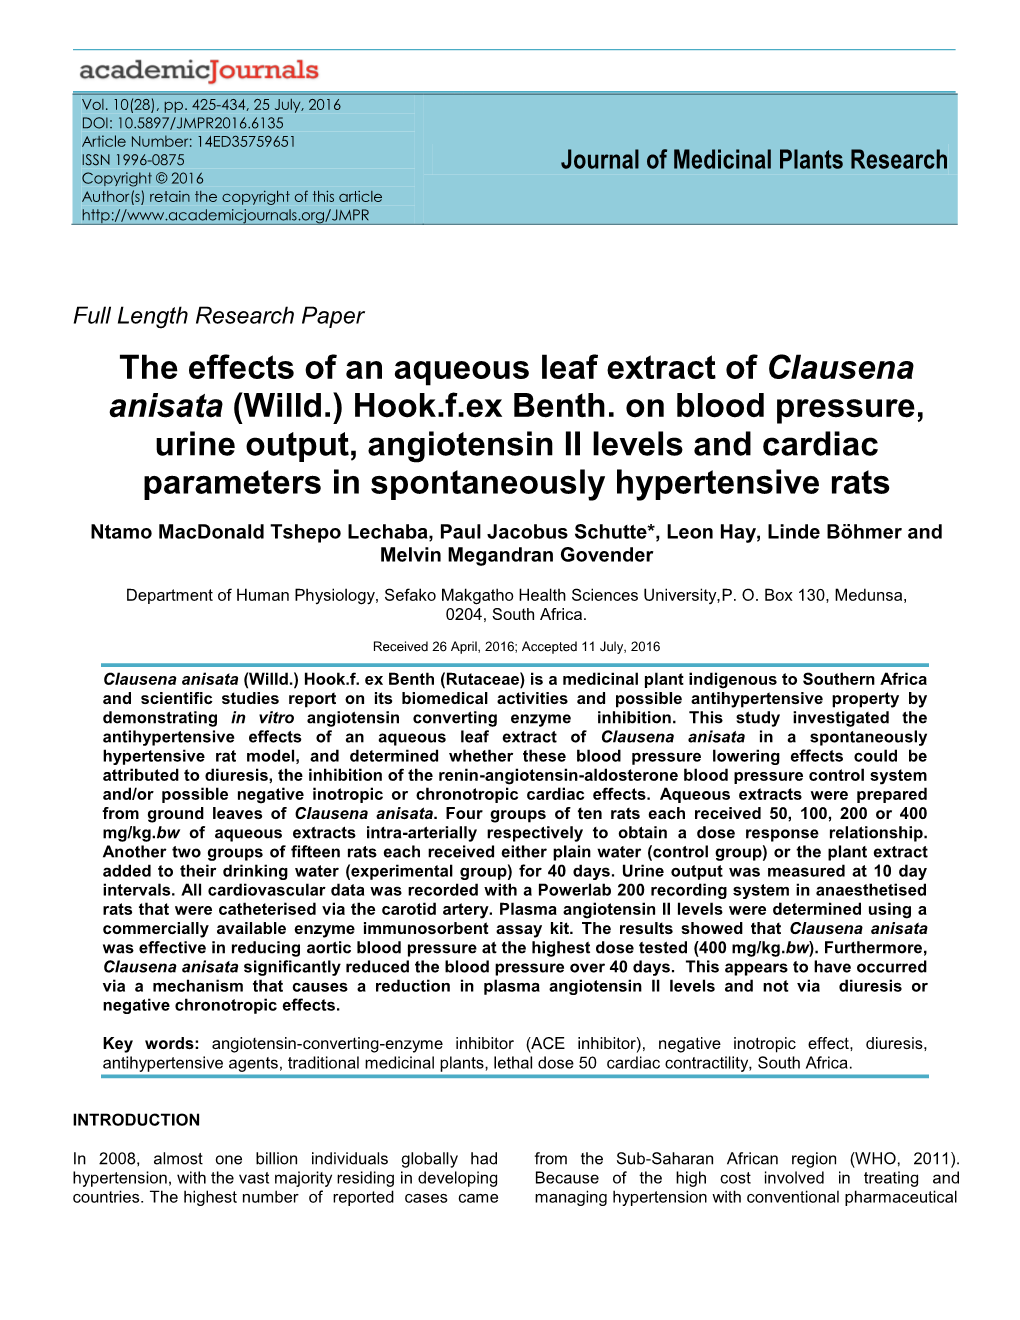 The Effects of an Aqueous Leaf Extract of Clausena Anisata (Willd.) Hook.F.Ex Benth